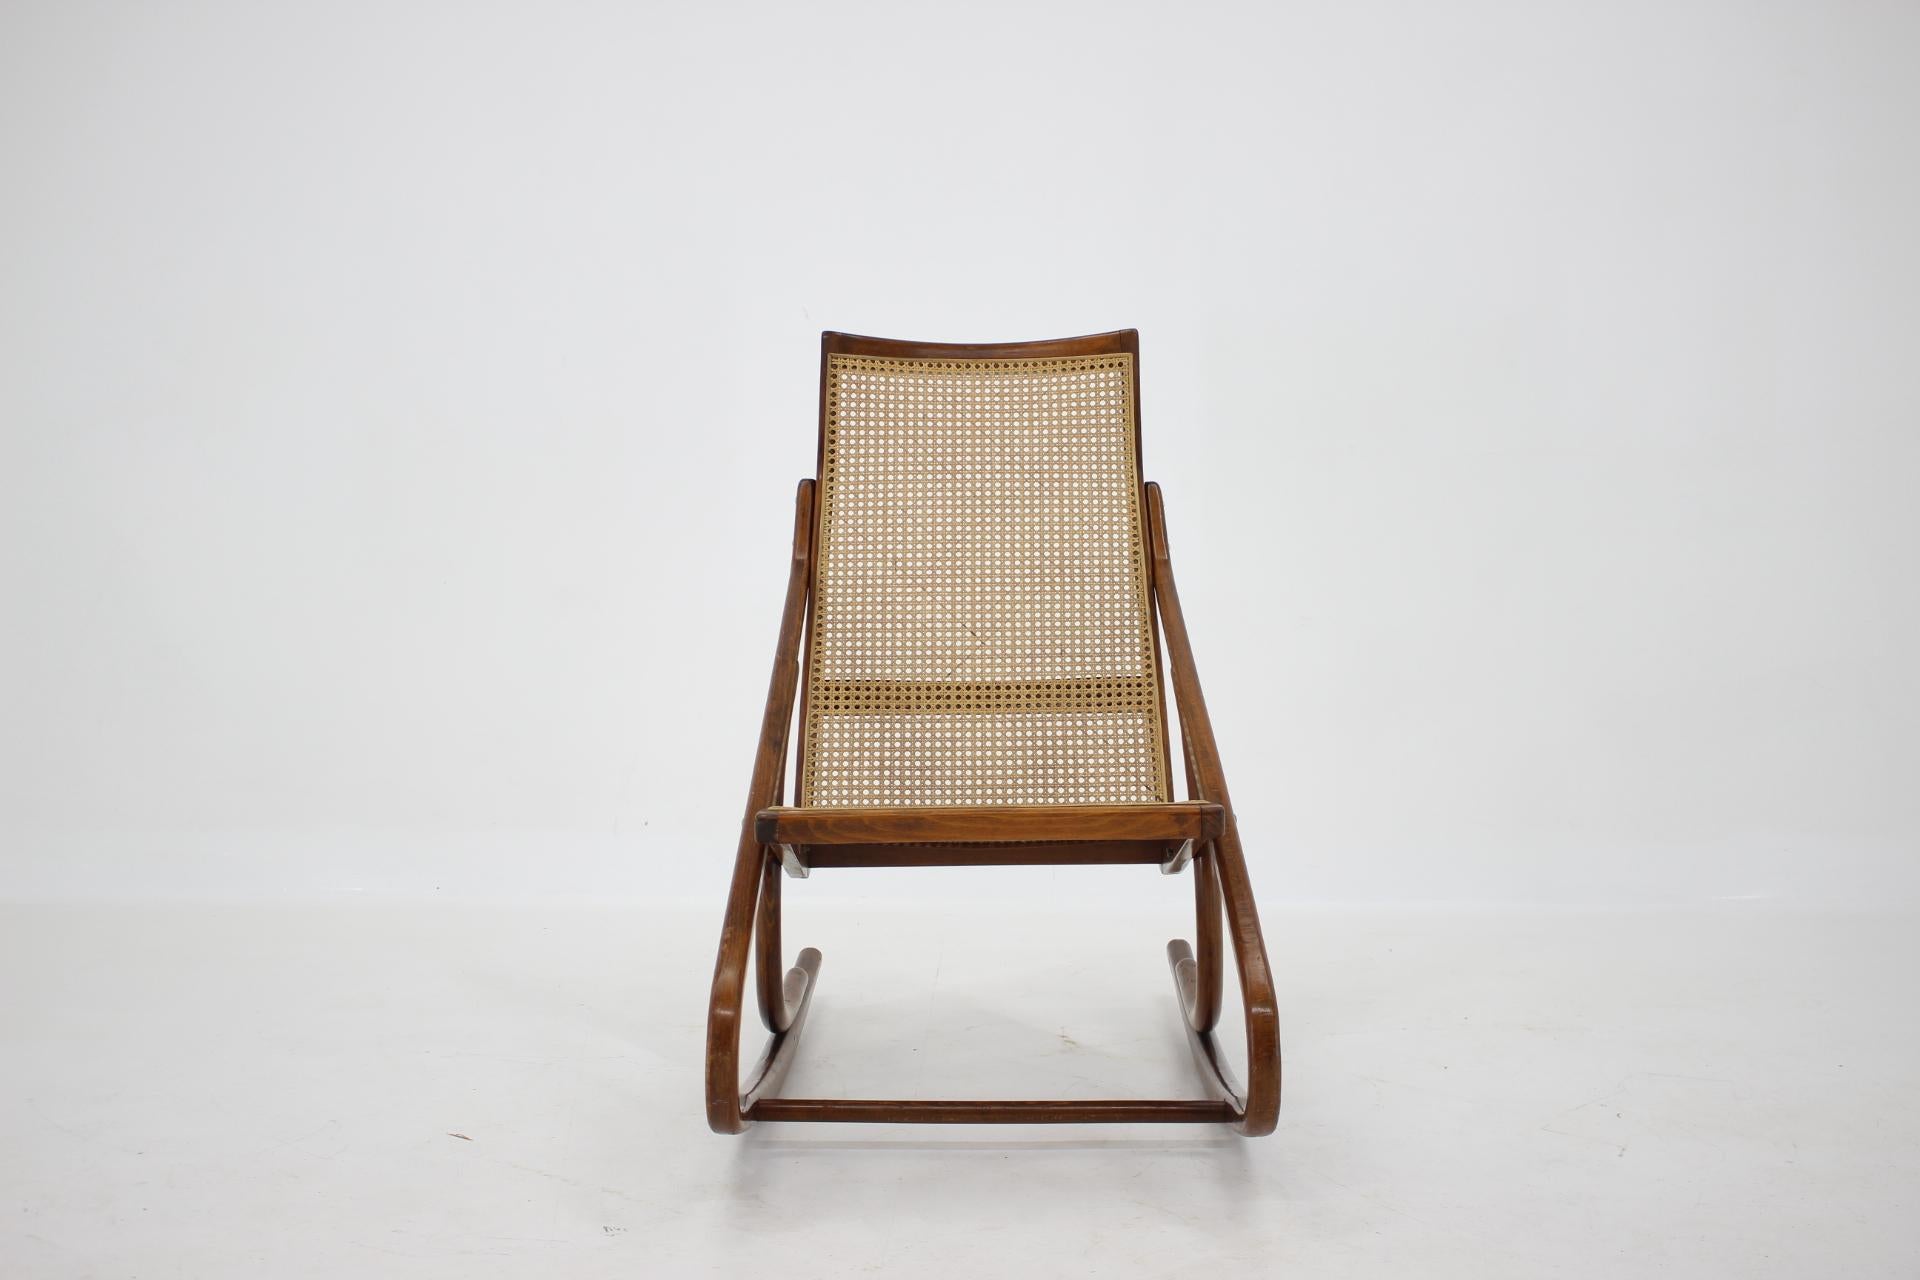 - Bentwood and caned seat in good condition 
- The wooden parts have been repolished.